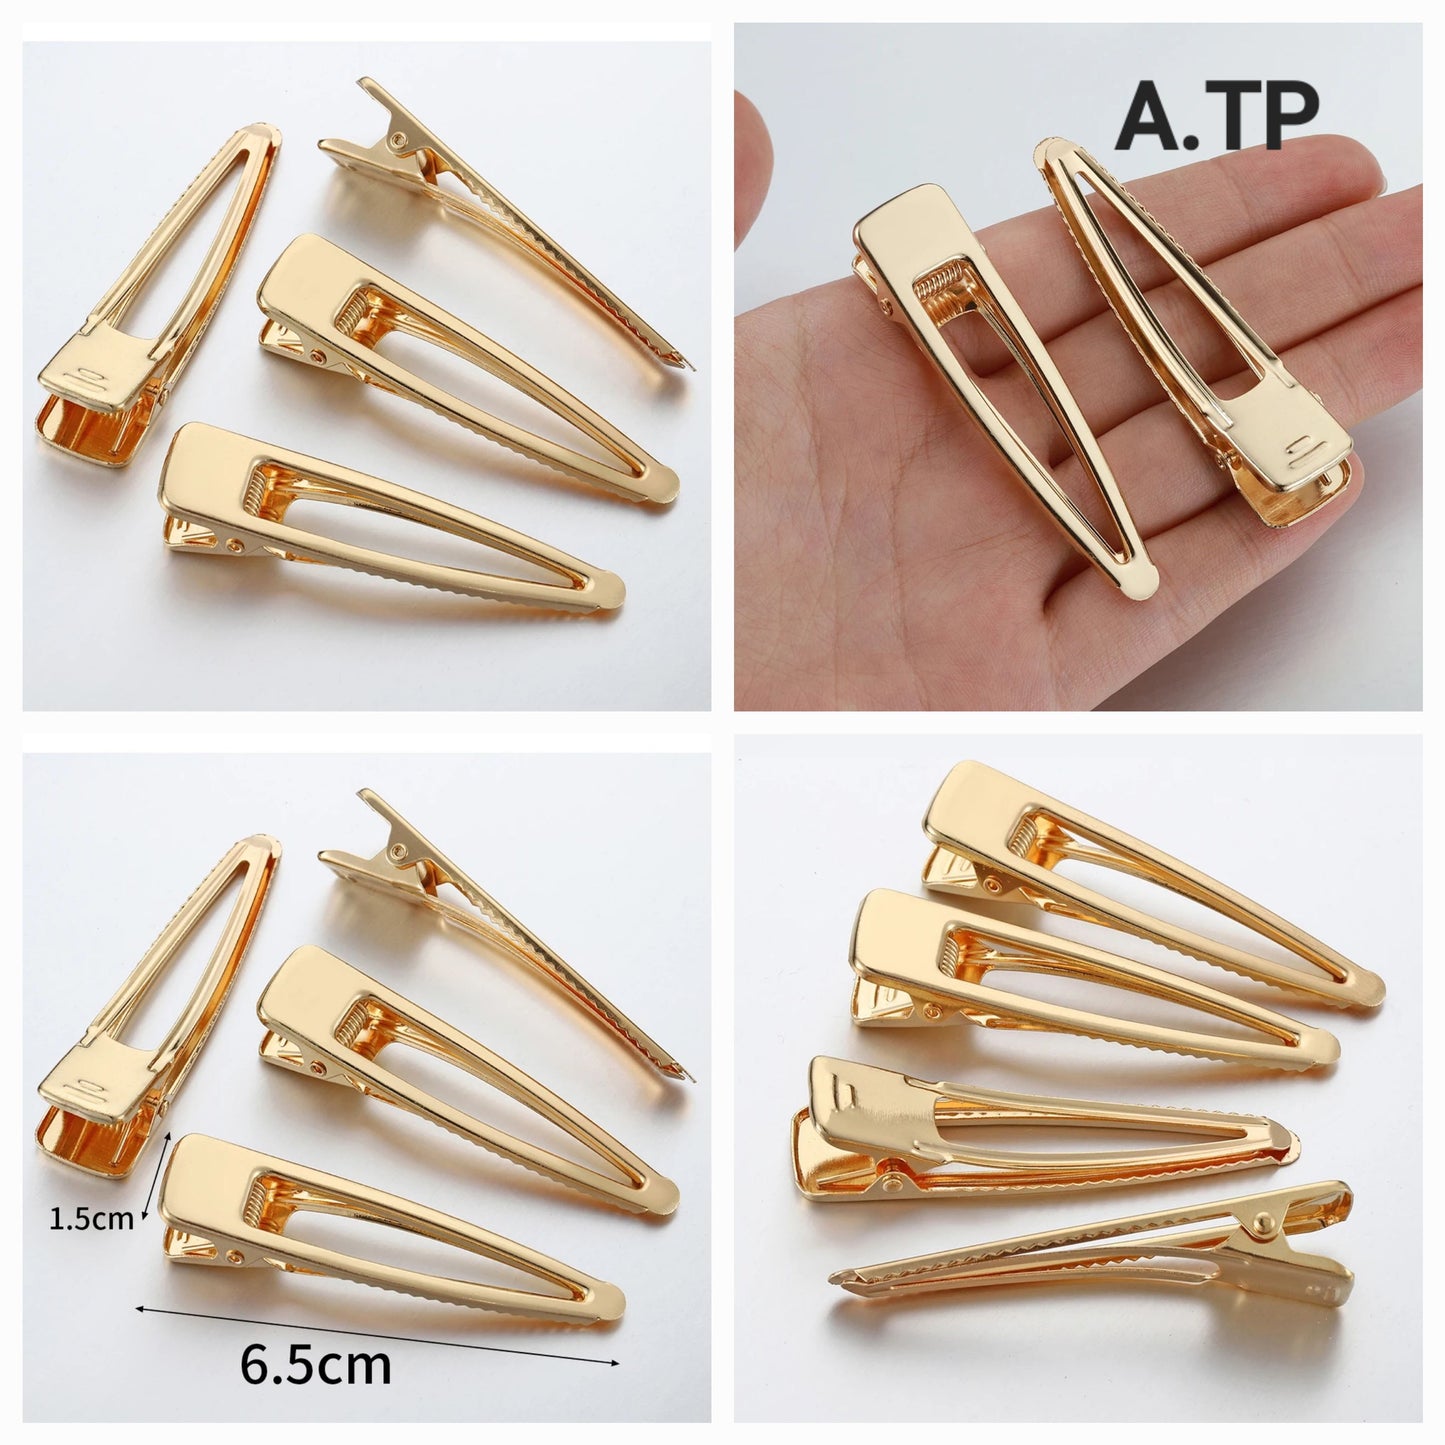 Gold alligator clips, perfect for creating unique hair accessories and bows. Ideal for DIY crafts